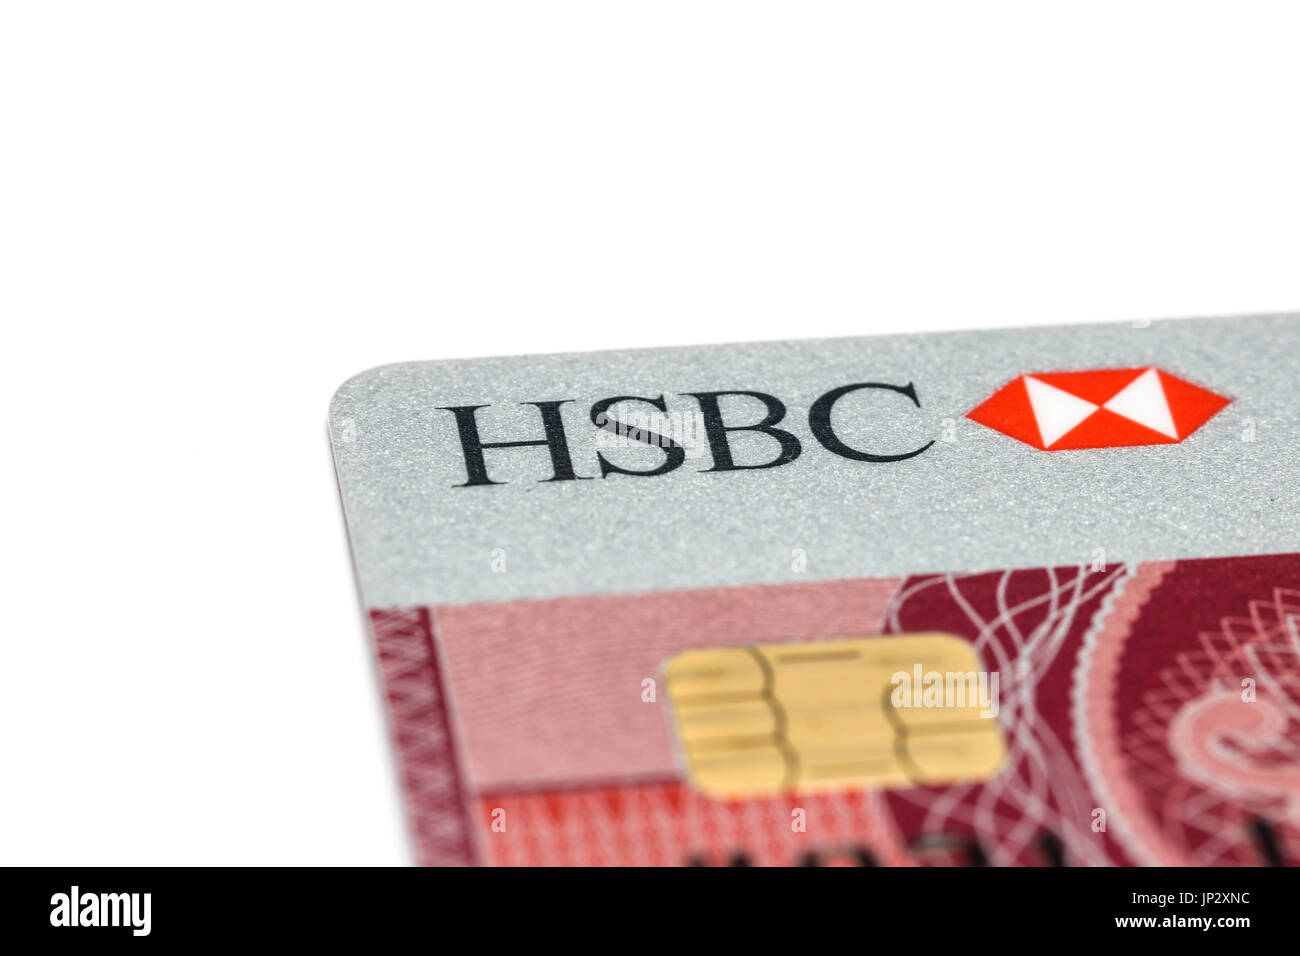 HSBC bank credit card on white background. HSBC Bank is one of the largest banking and financial services organisations. Stock Photo